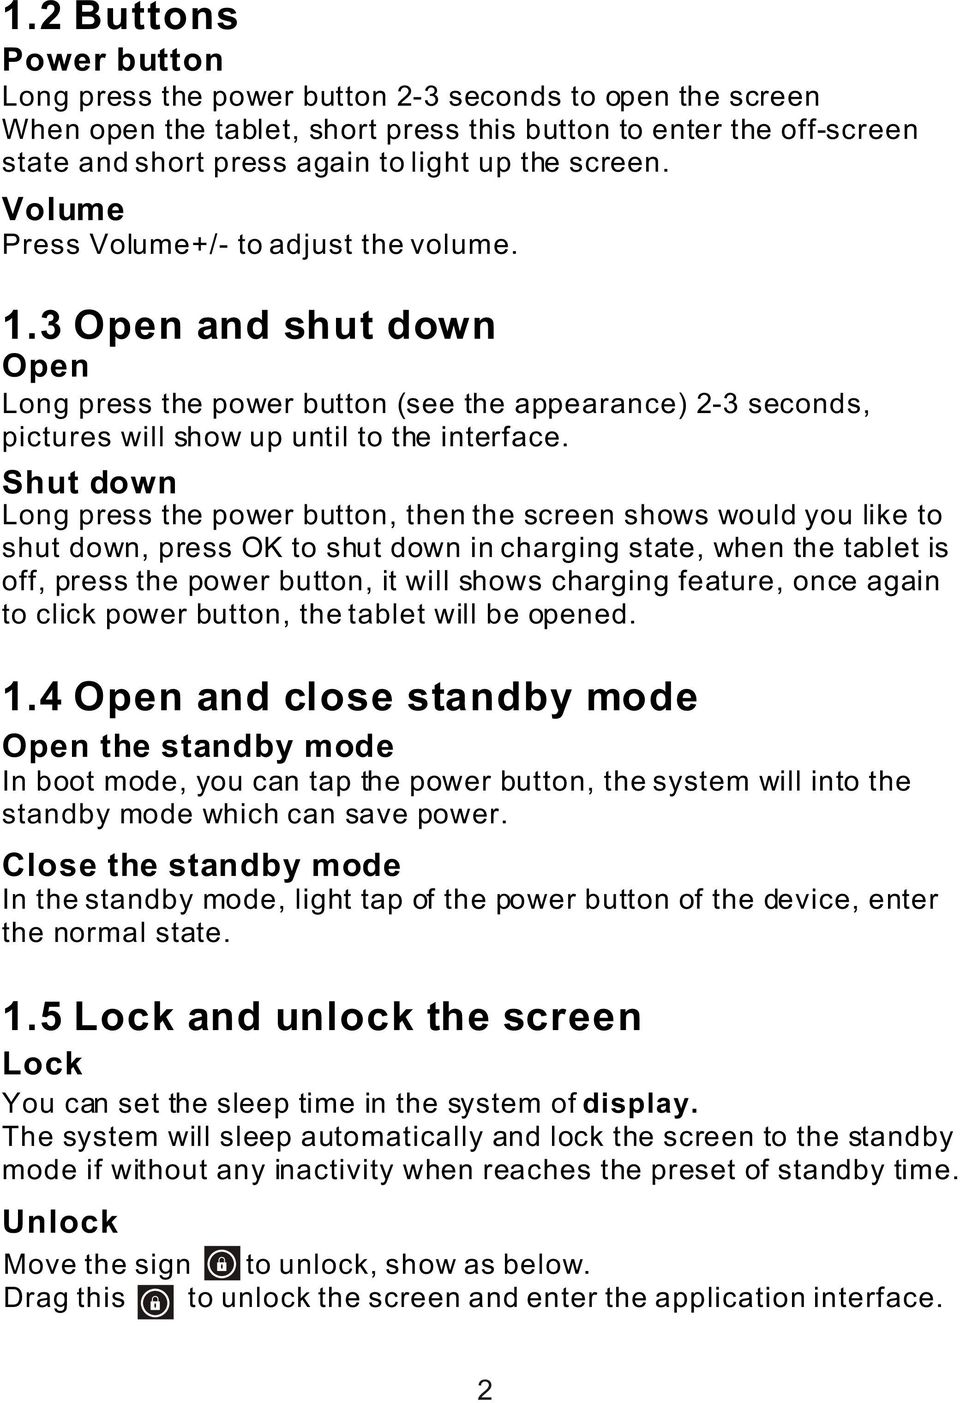 Shut down Long press the power button, then the screen shows would you like to shut down, press OK to shut down in charging state, when the tablet is off, press the power button, it will shows